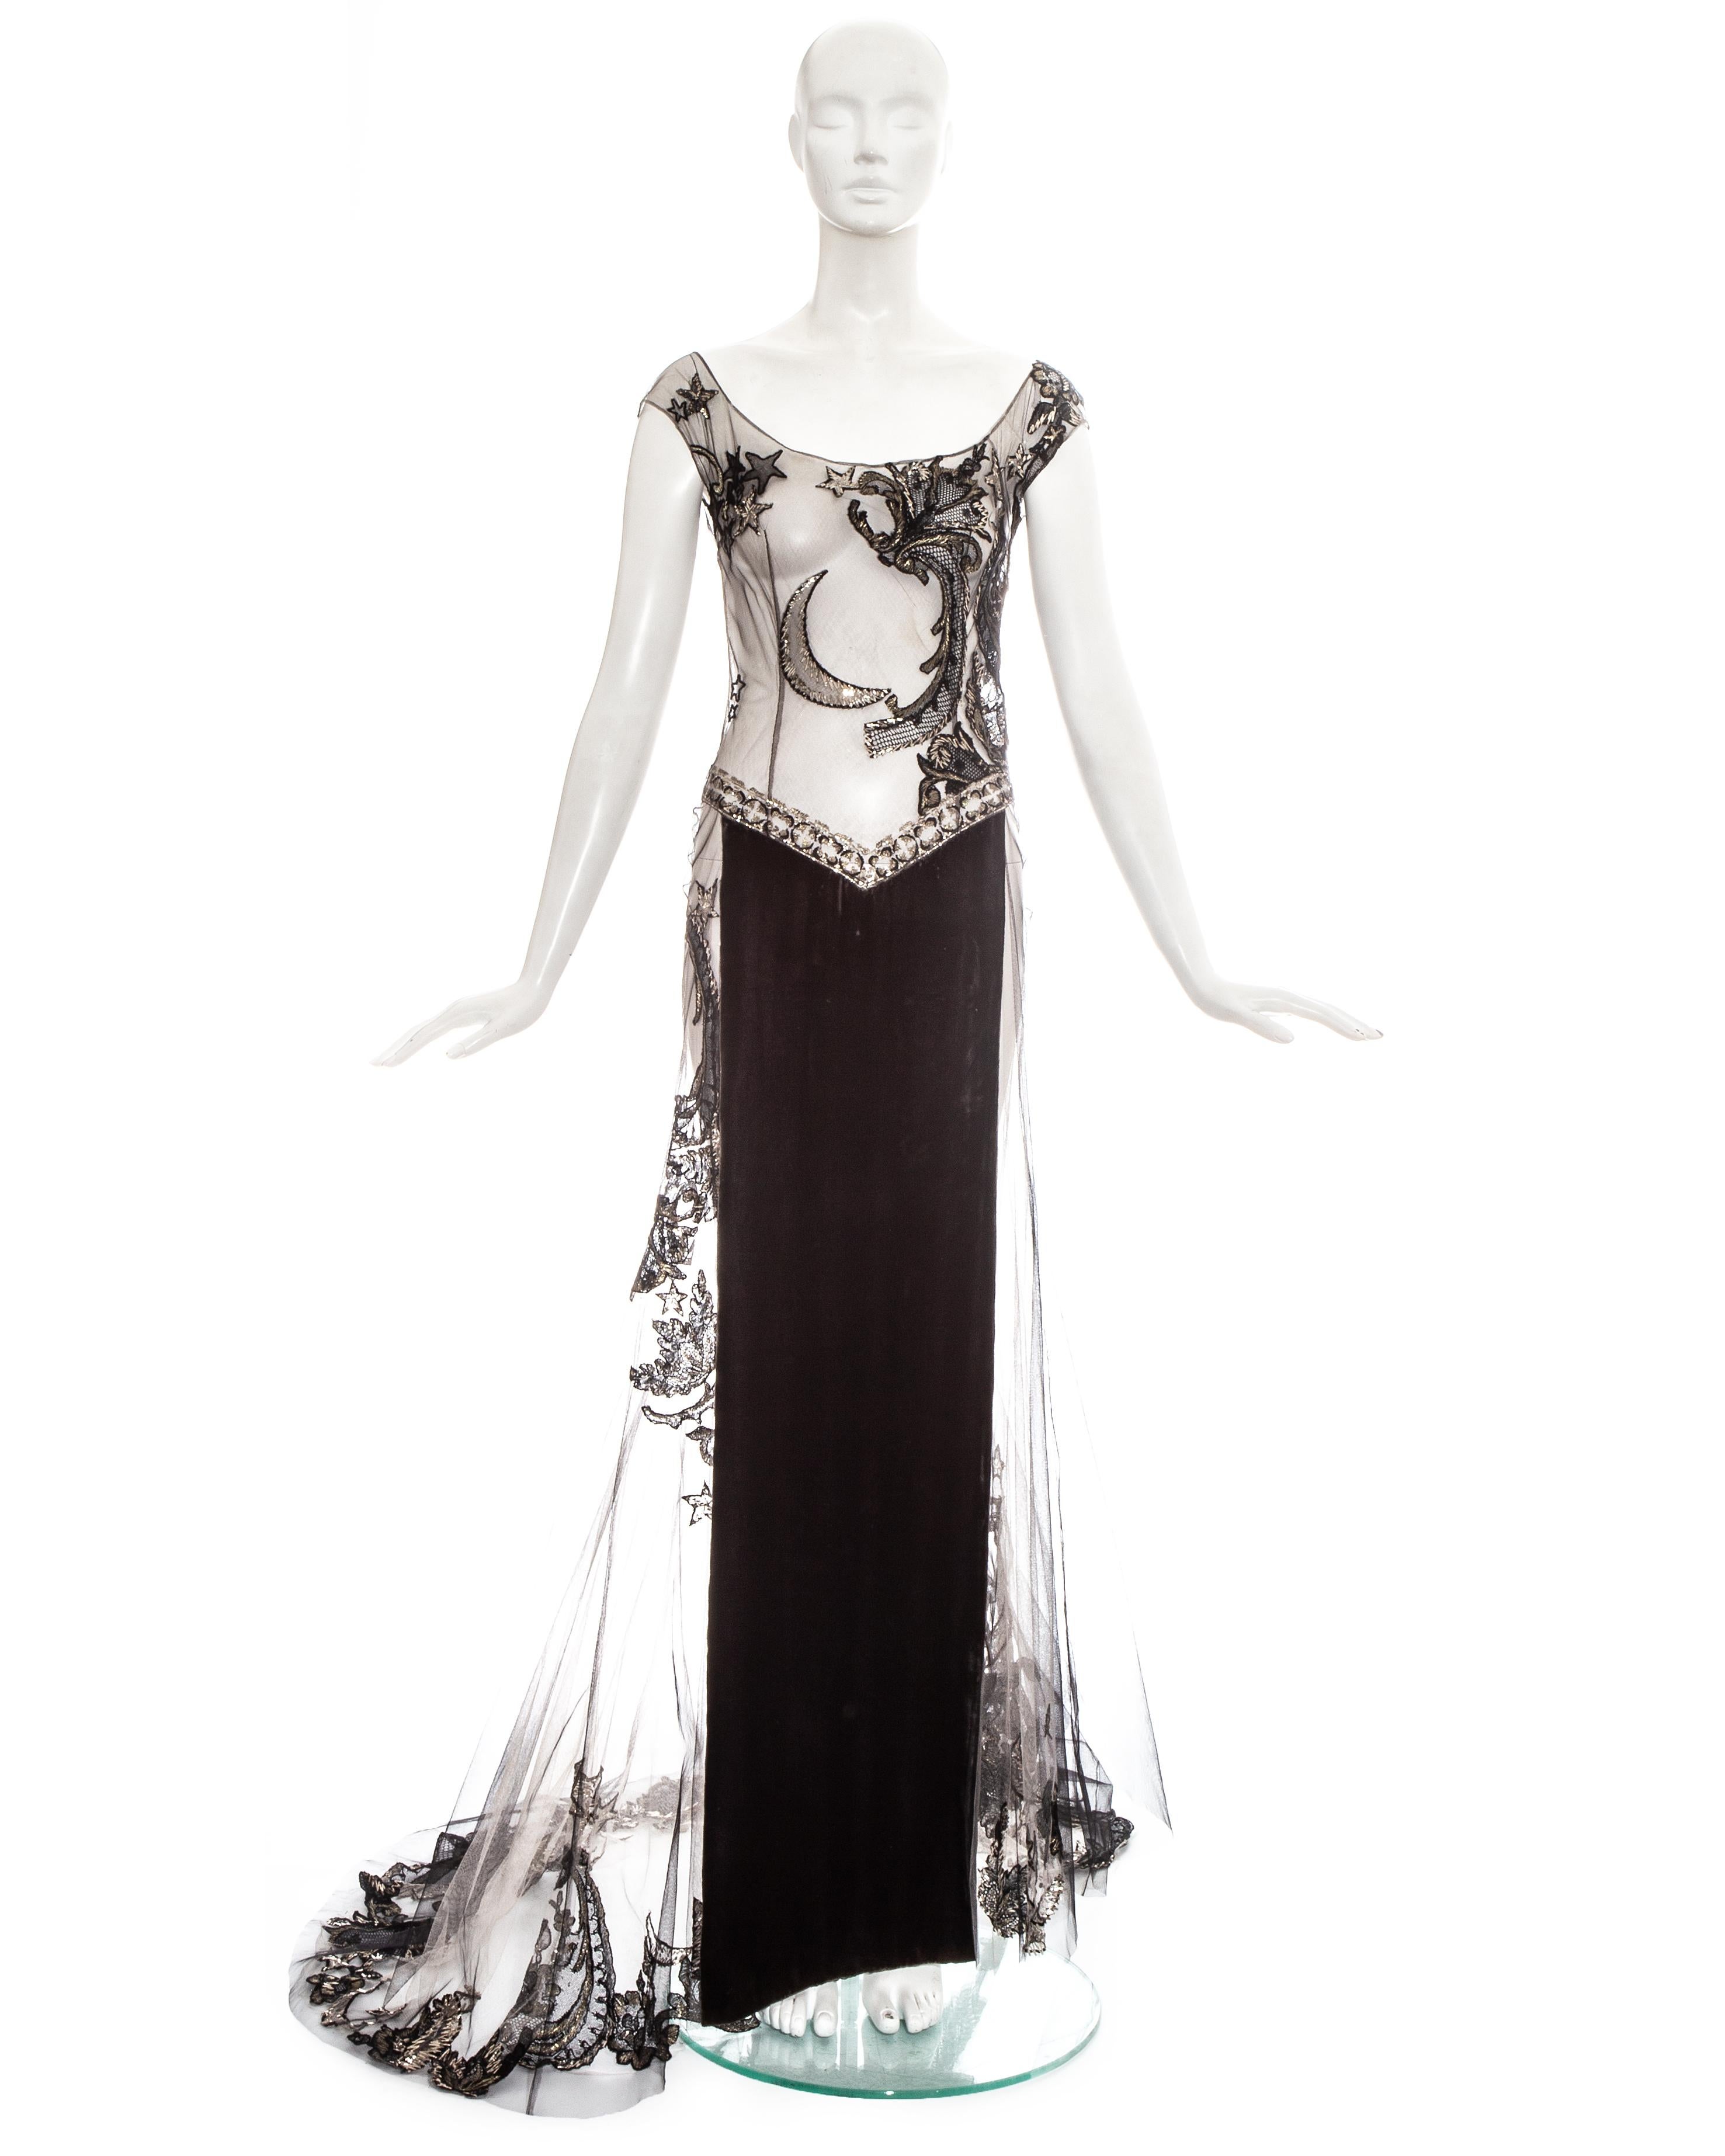 Gianfranco Ferré couture embroidered tulle evening gown, WITH metal-strip worked crescent moon, stars and arabesques, skirt with velvet central front panel and trained hem and concealed zip fastening. 

Fall-Winter 1998